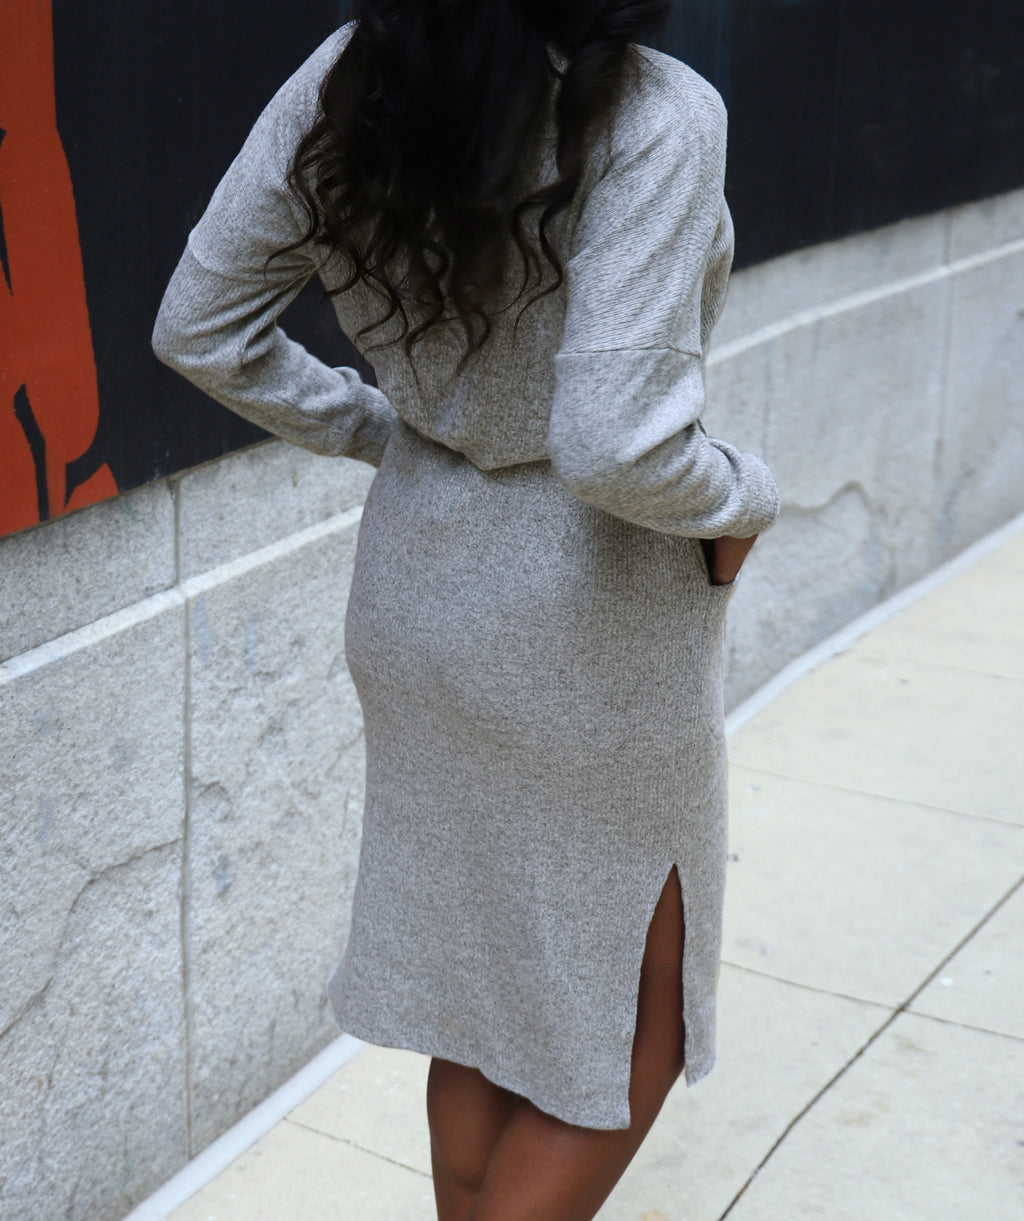 CITY sweater knit skirt in Grey Heather